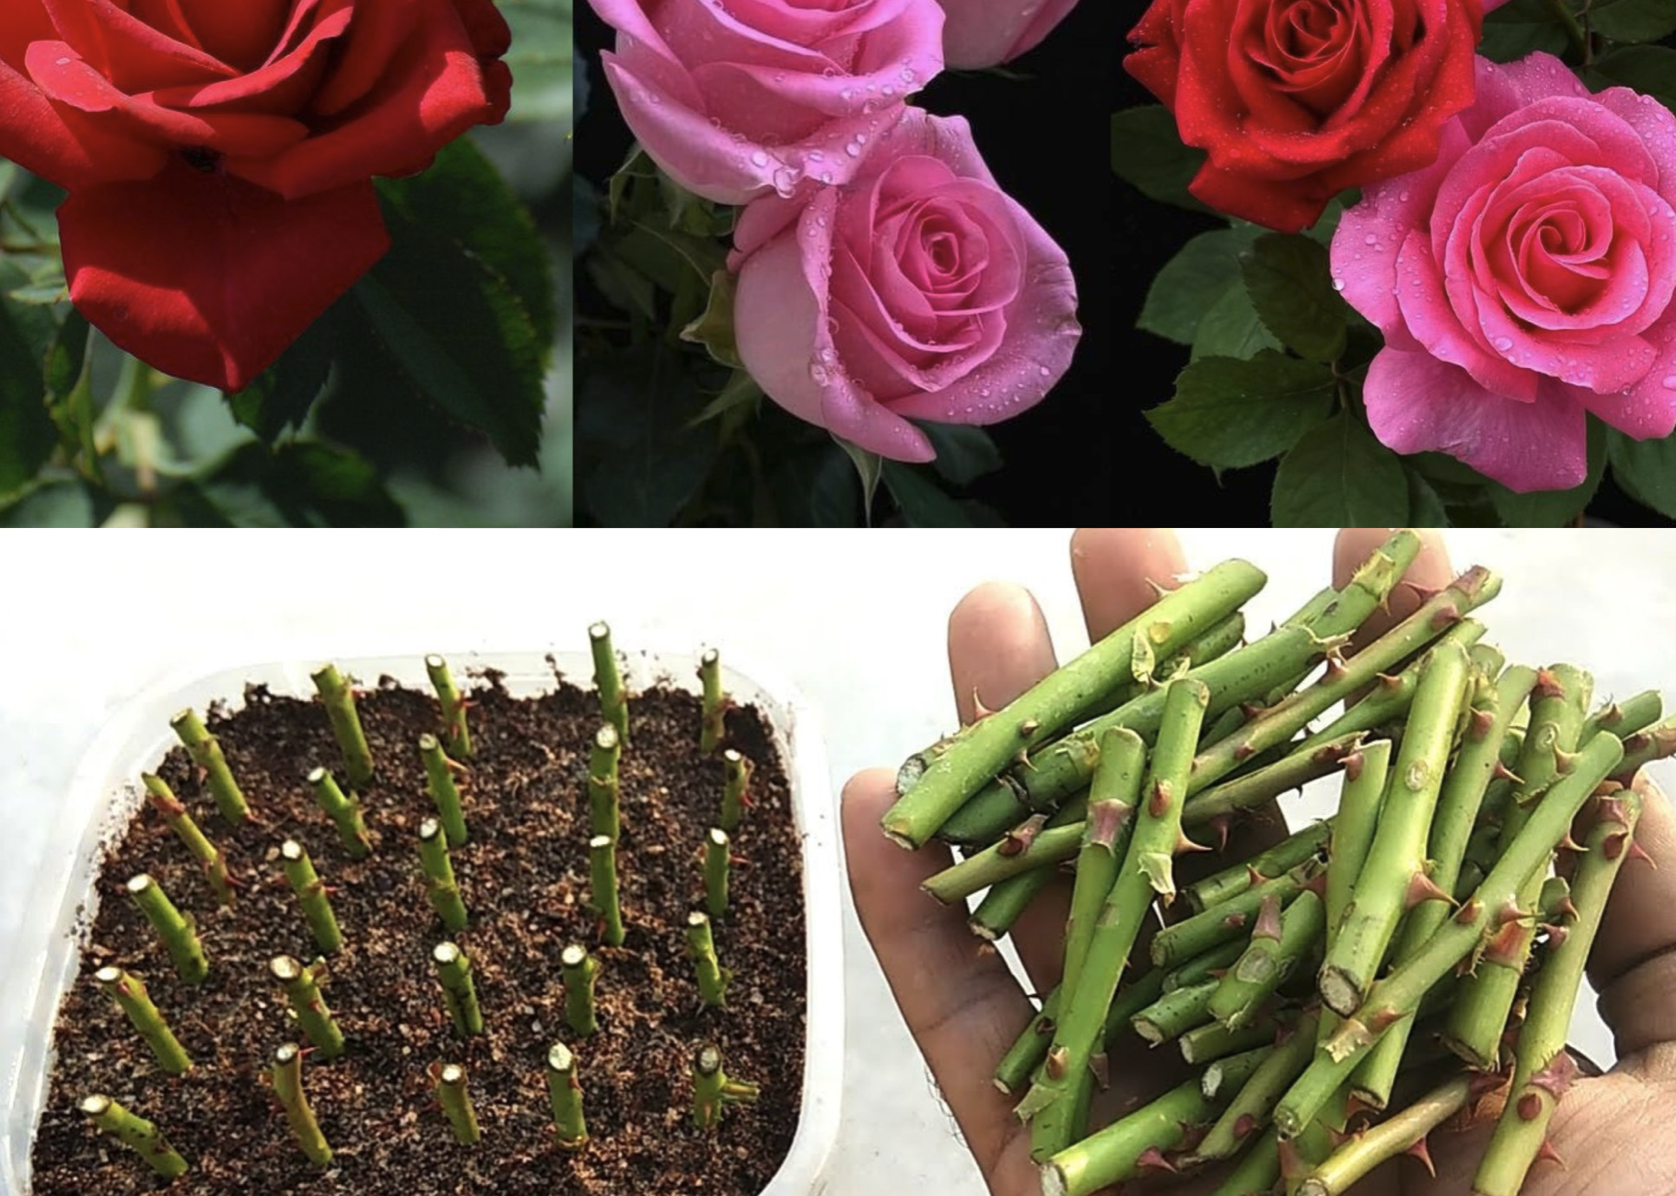 How to propagate roses from cuttings